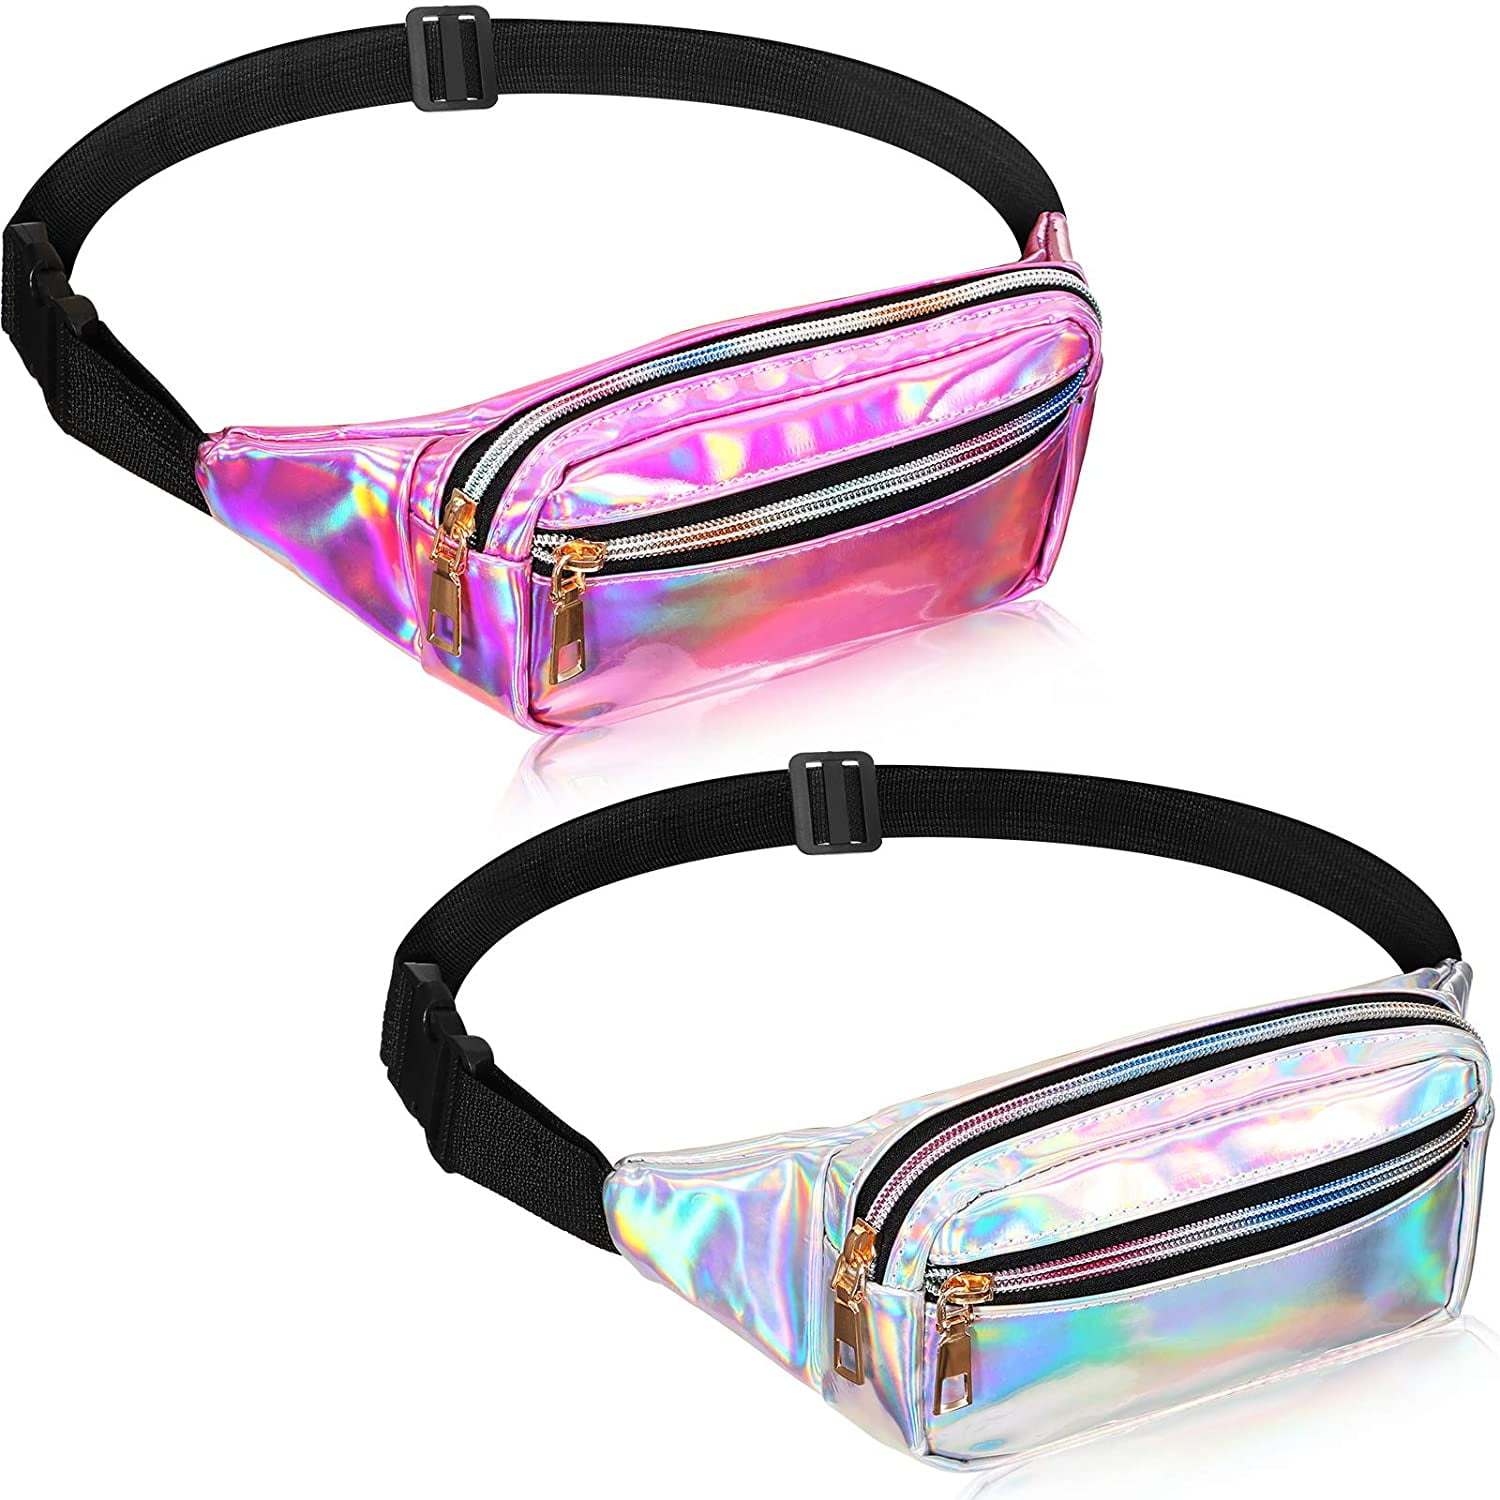 6 Pieces Neon Bachelorette Fanny Pack set 80s Party Fanny Pack Waist Bag Adjustable Waist 2 Zipper Travel Running Fanny Pack for Rave Party Women 